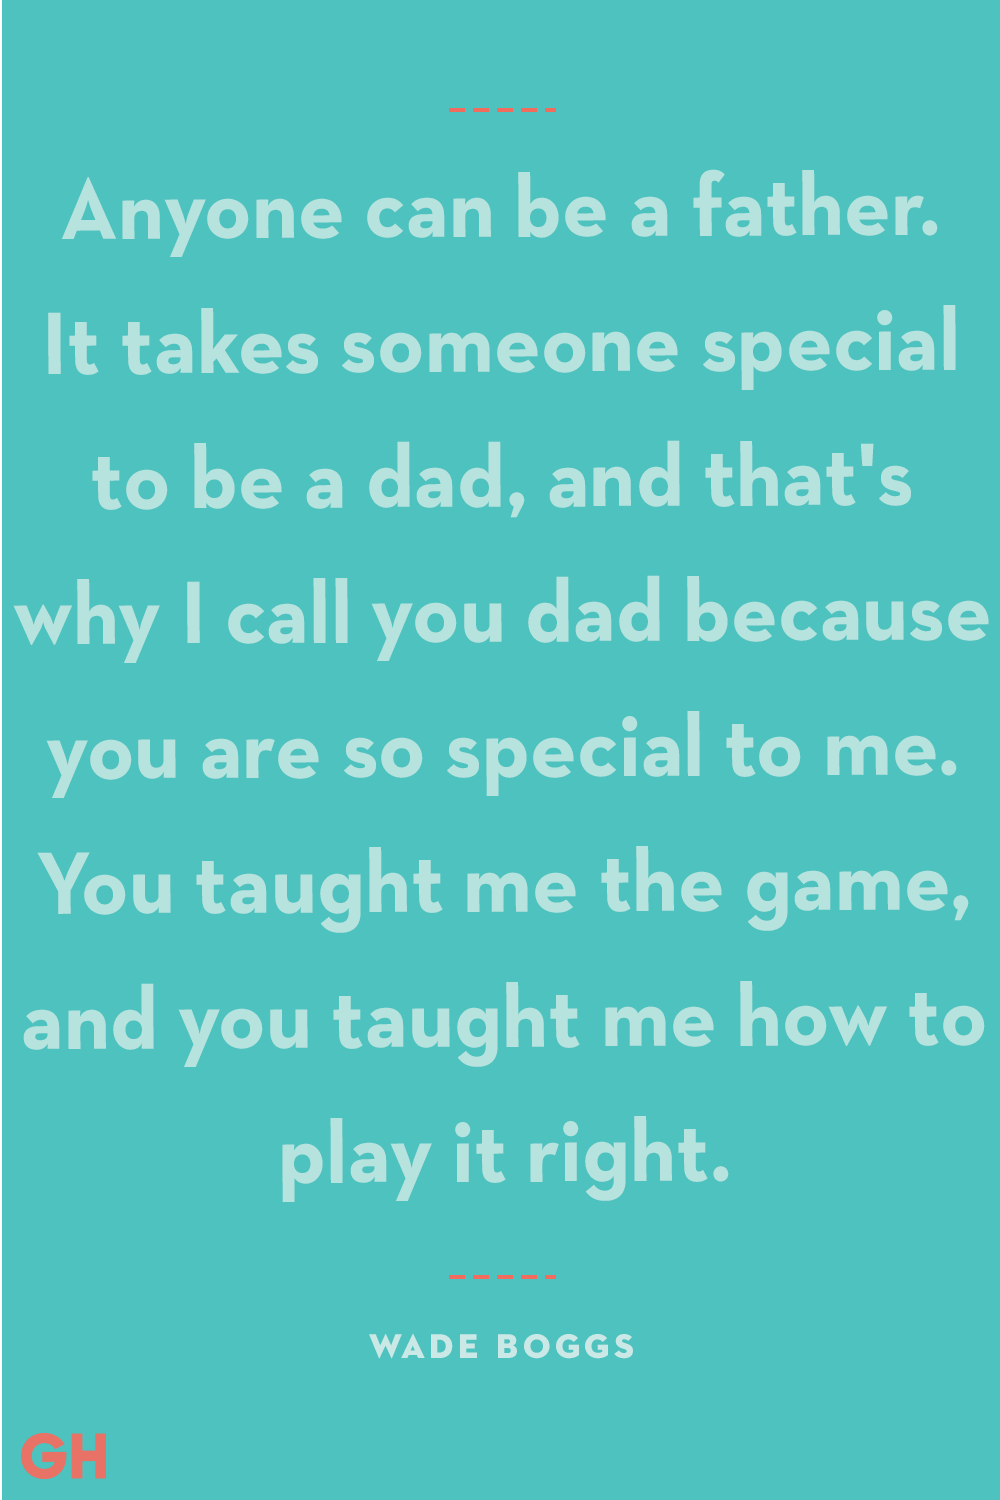 proud father quotes for a daughter